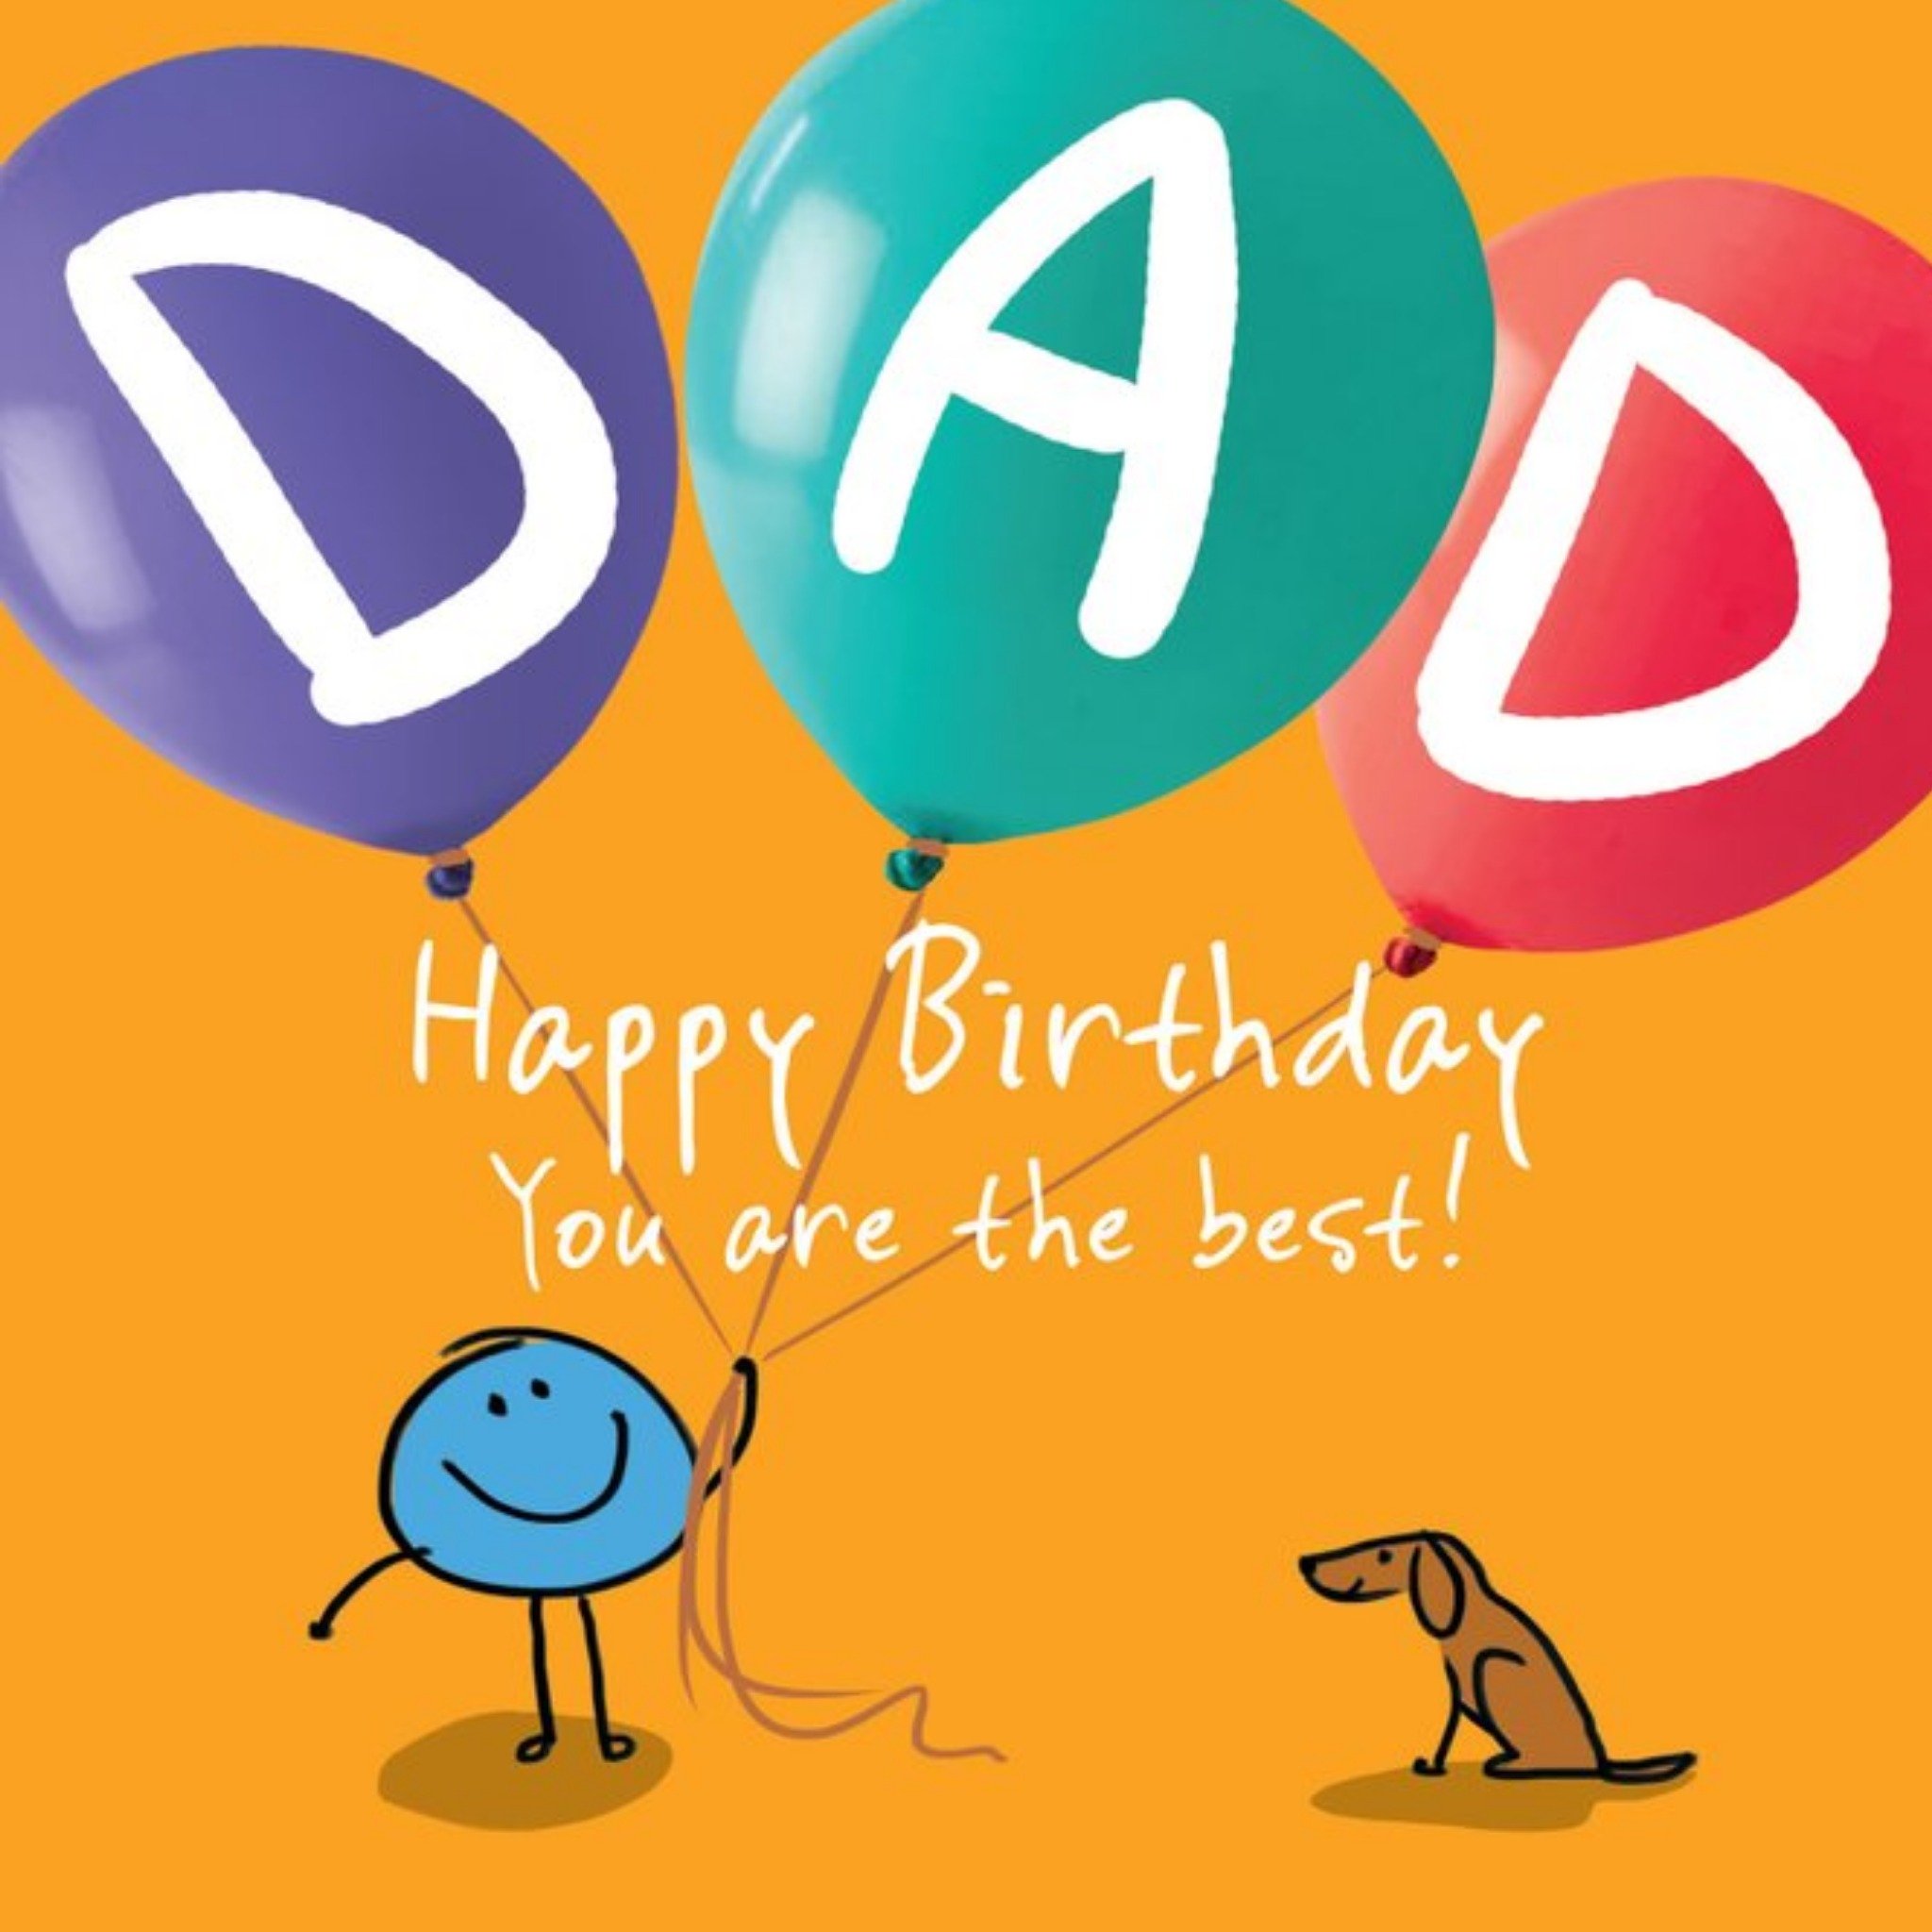 Moonpig Illustration Of A Character With Colourful Balloons Dad's Birthday Card, Large